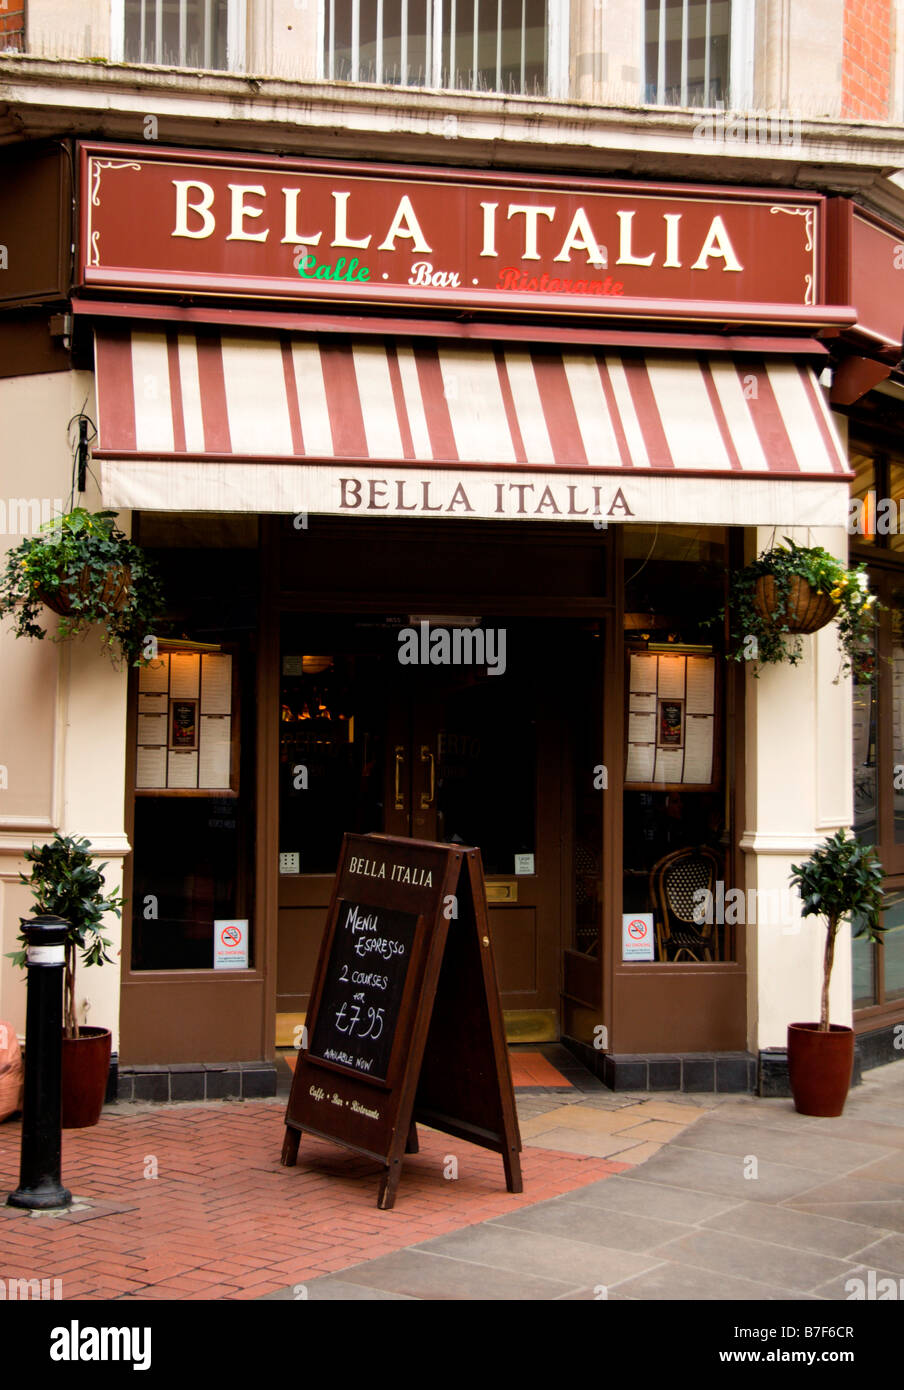 The store front of a Bella Italia restaurant in Oxford, England. Jan 2009 Stock Photo